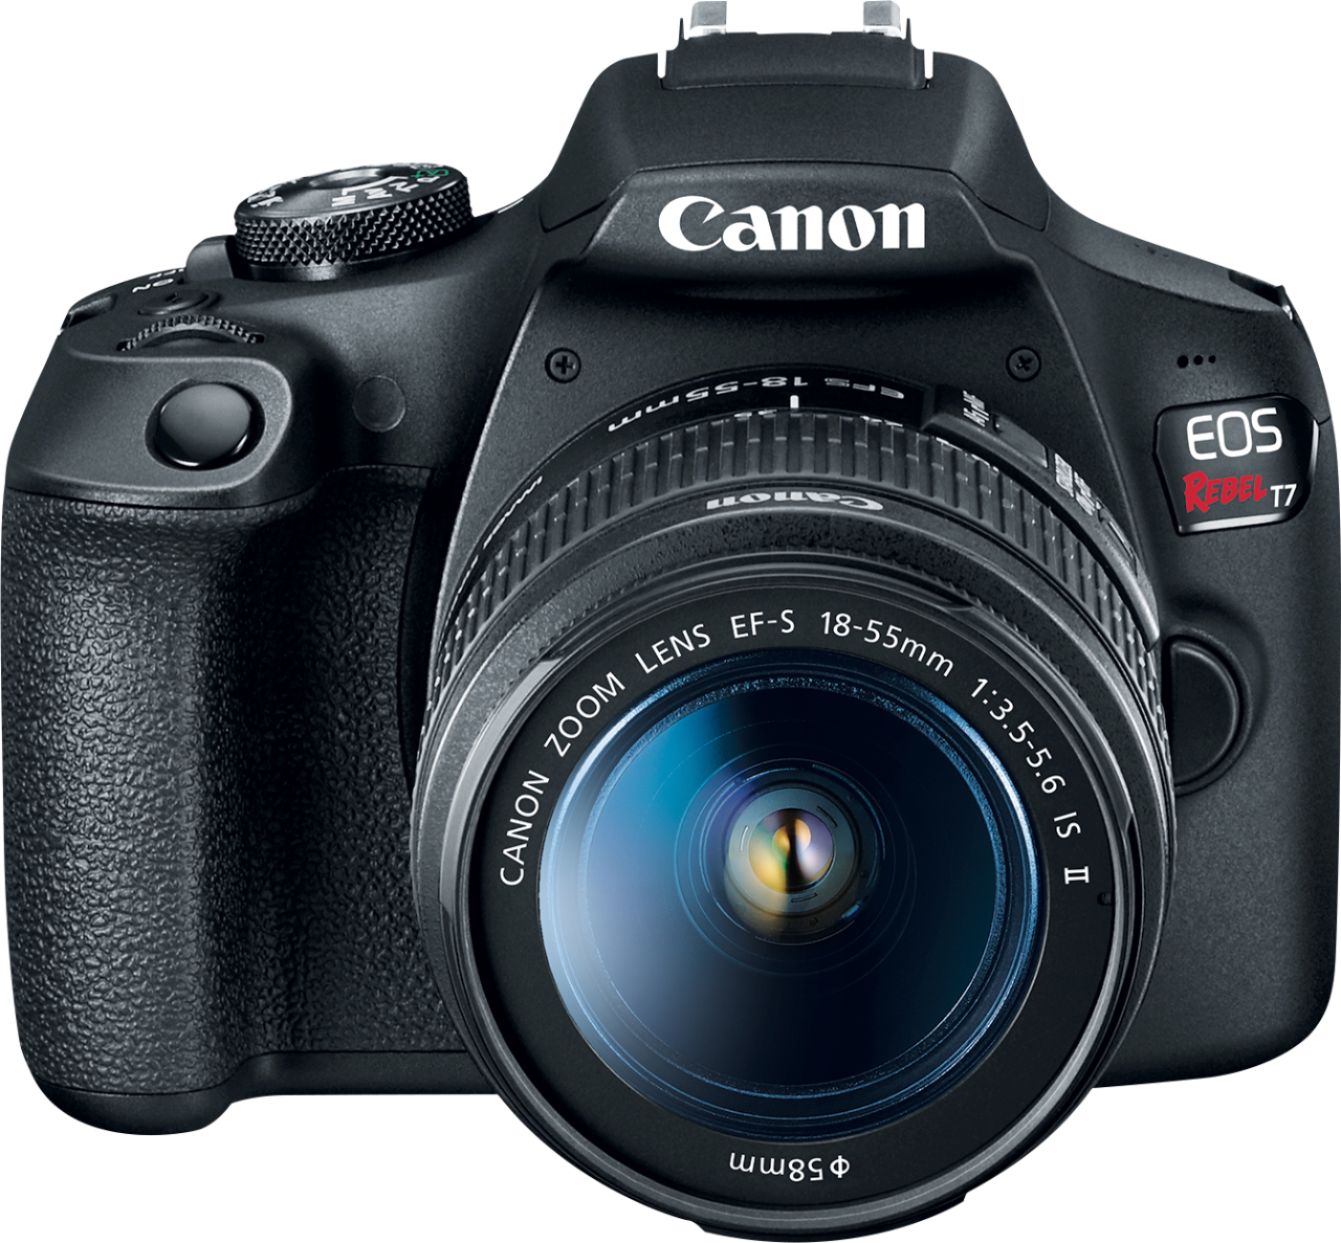 Canon EOS 2000D / Rebel T7 DSLR (New) 18-55 Lens, Wi-Fi, Filter, Bag, Card  and Many More